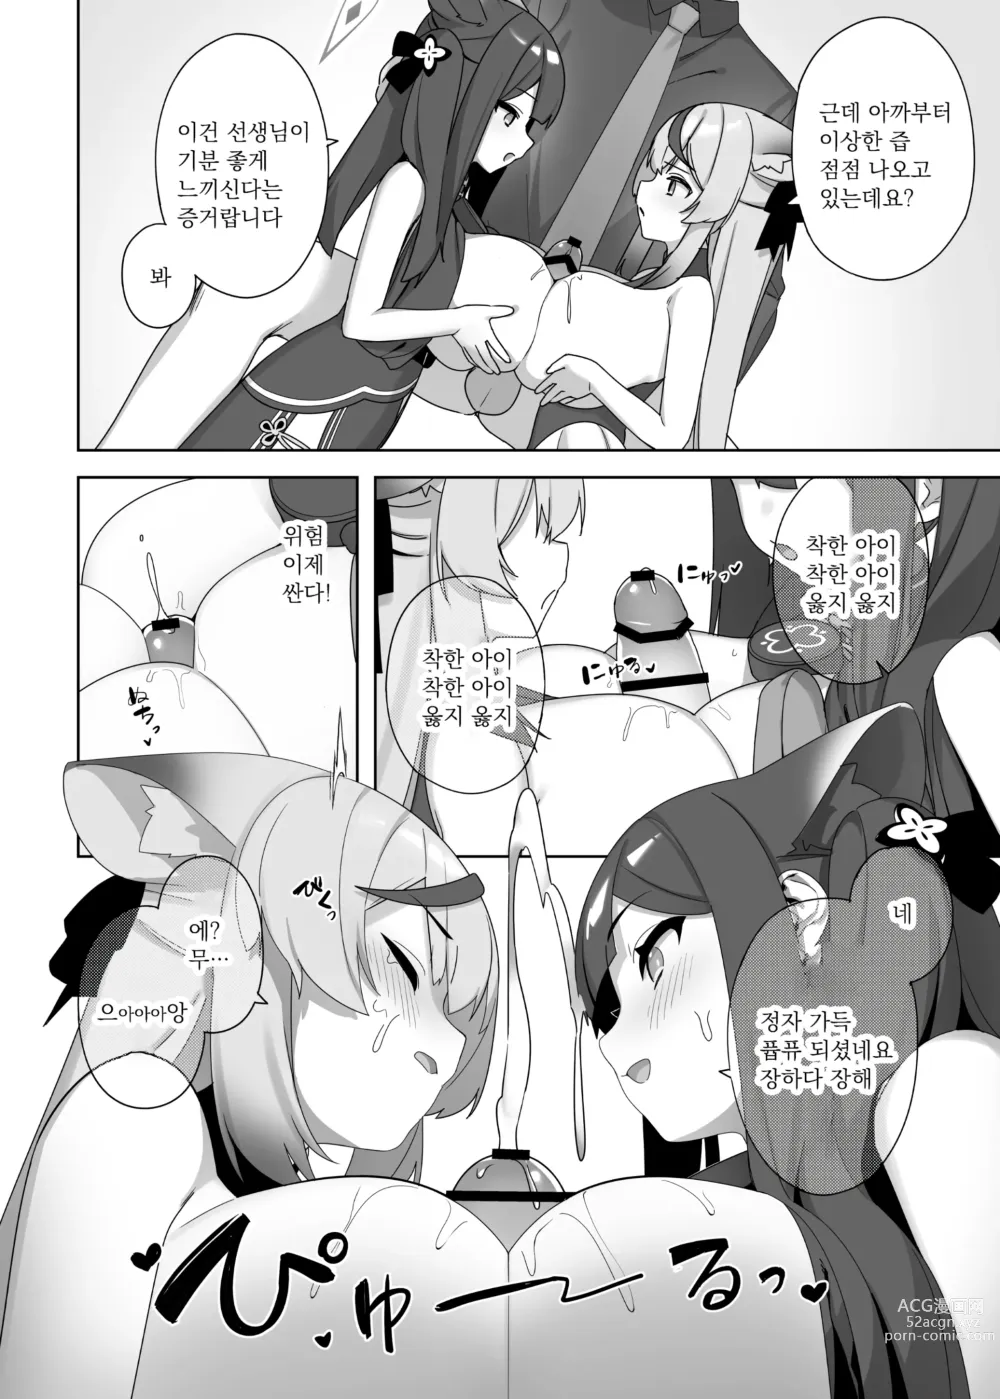 Page 9 of doujinshi Shuekoko Expansion - Live for oppai loli, Die for oppai loli